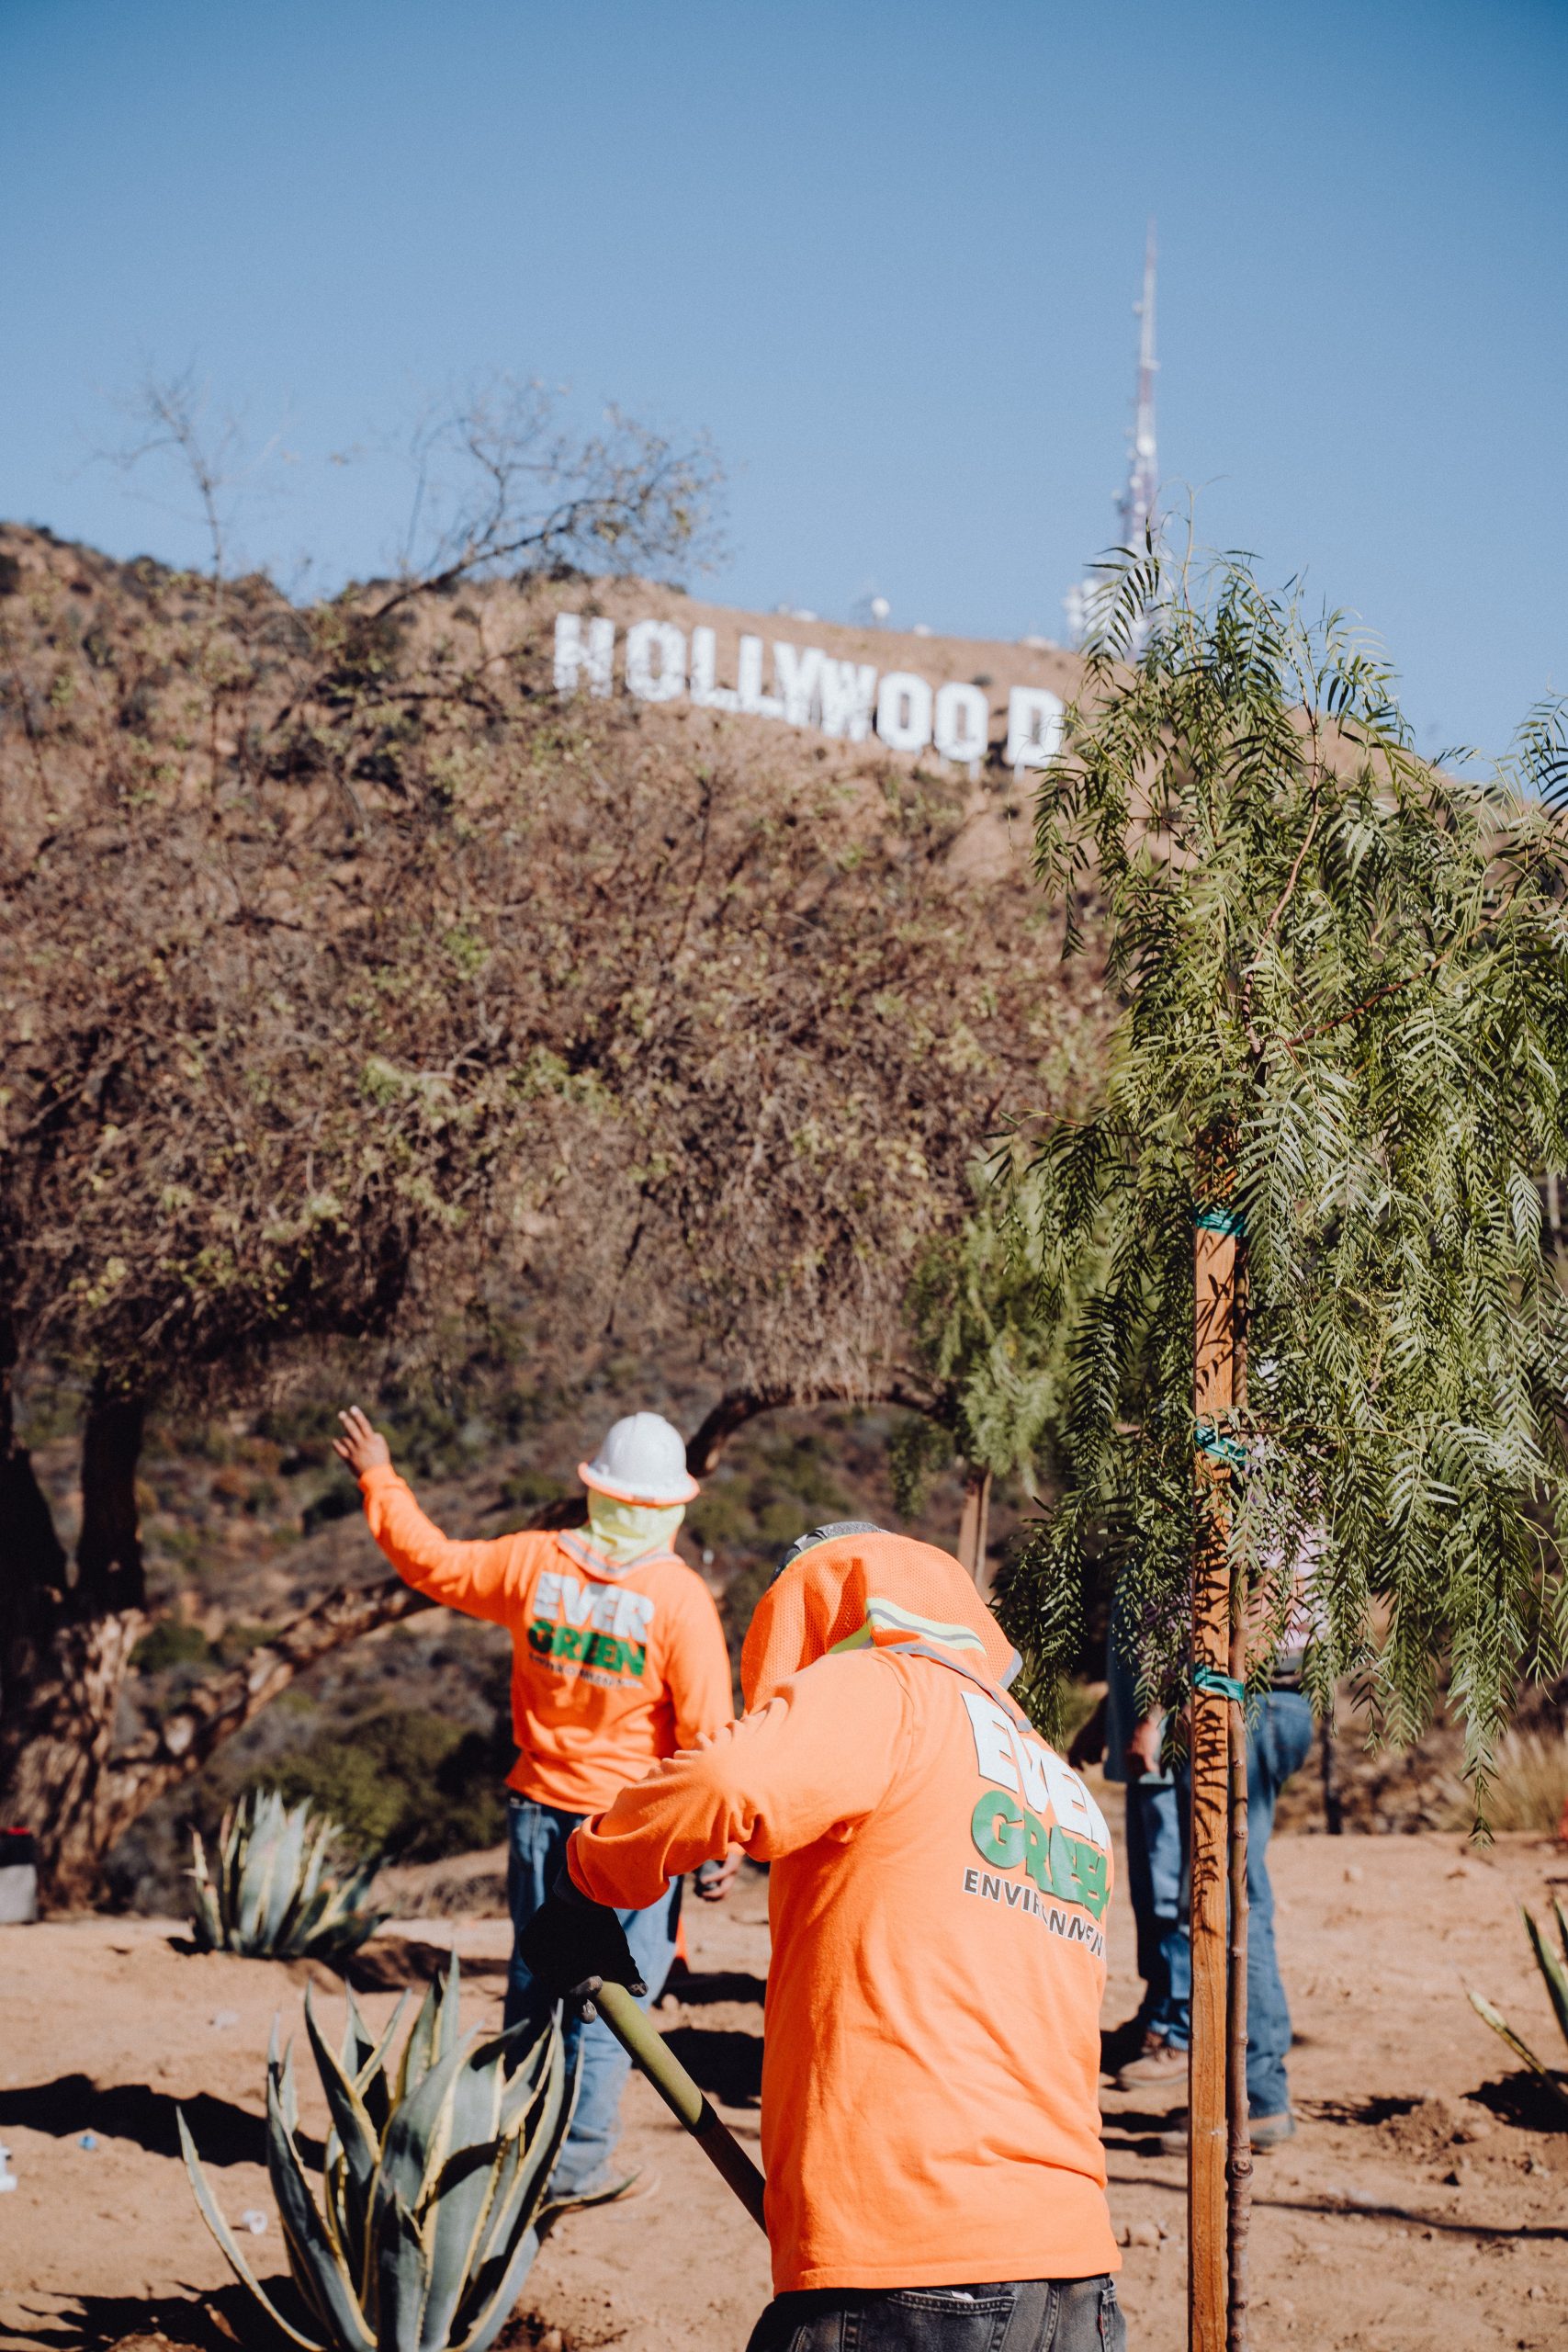 Image of two outdoor workers in orange t-shirts tending to trees. Both have coverings on their head because of the sun and heat. The Hollywood sign is in the background.